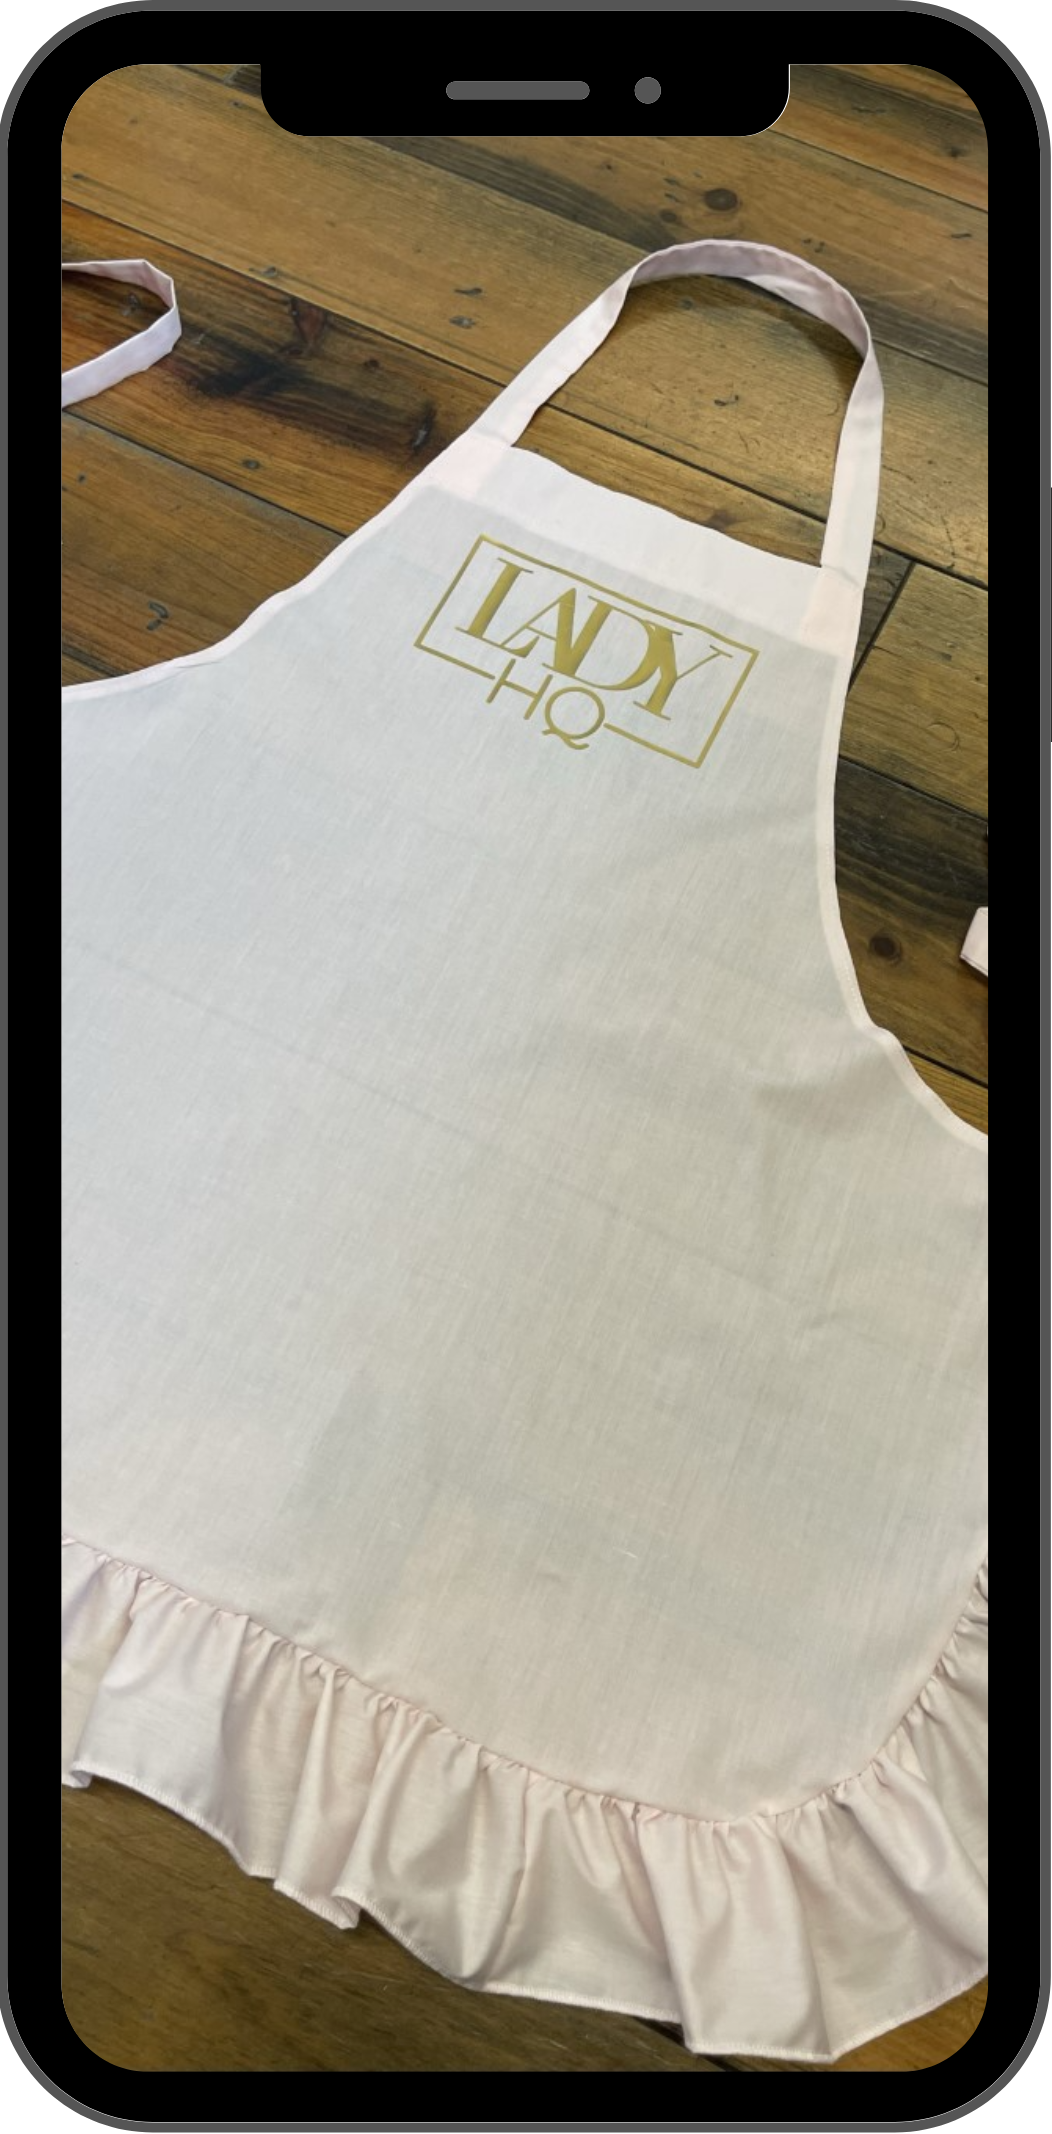 Lady HQ Apron design by Peggy-Mays